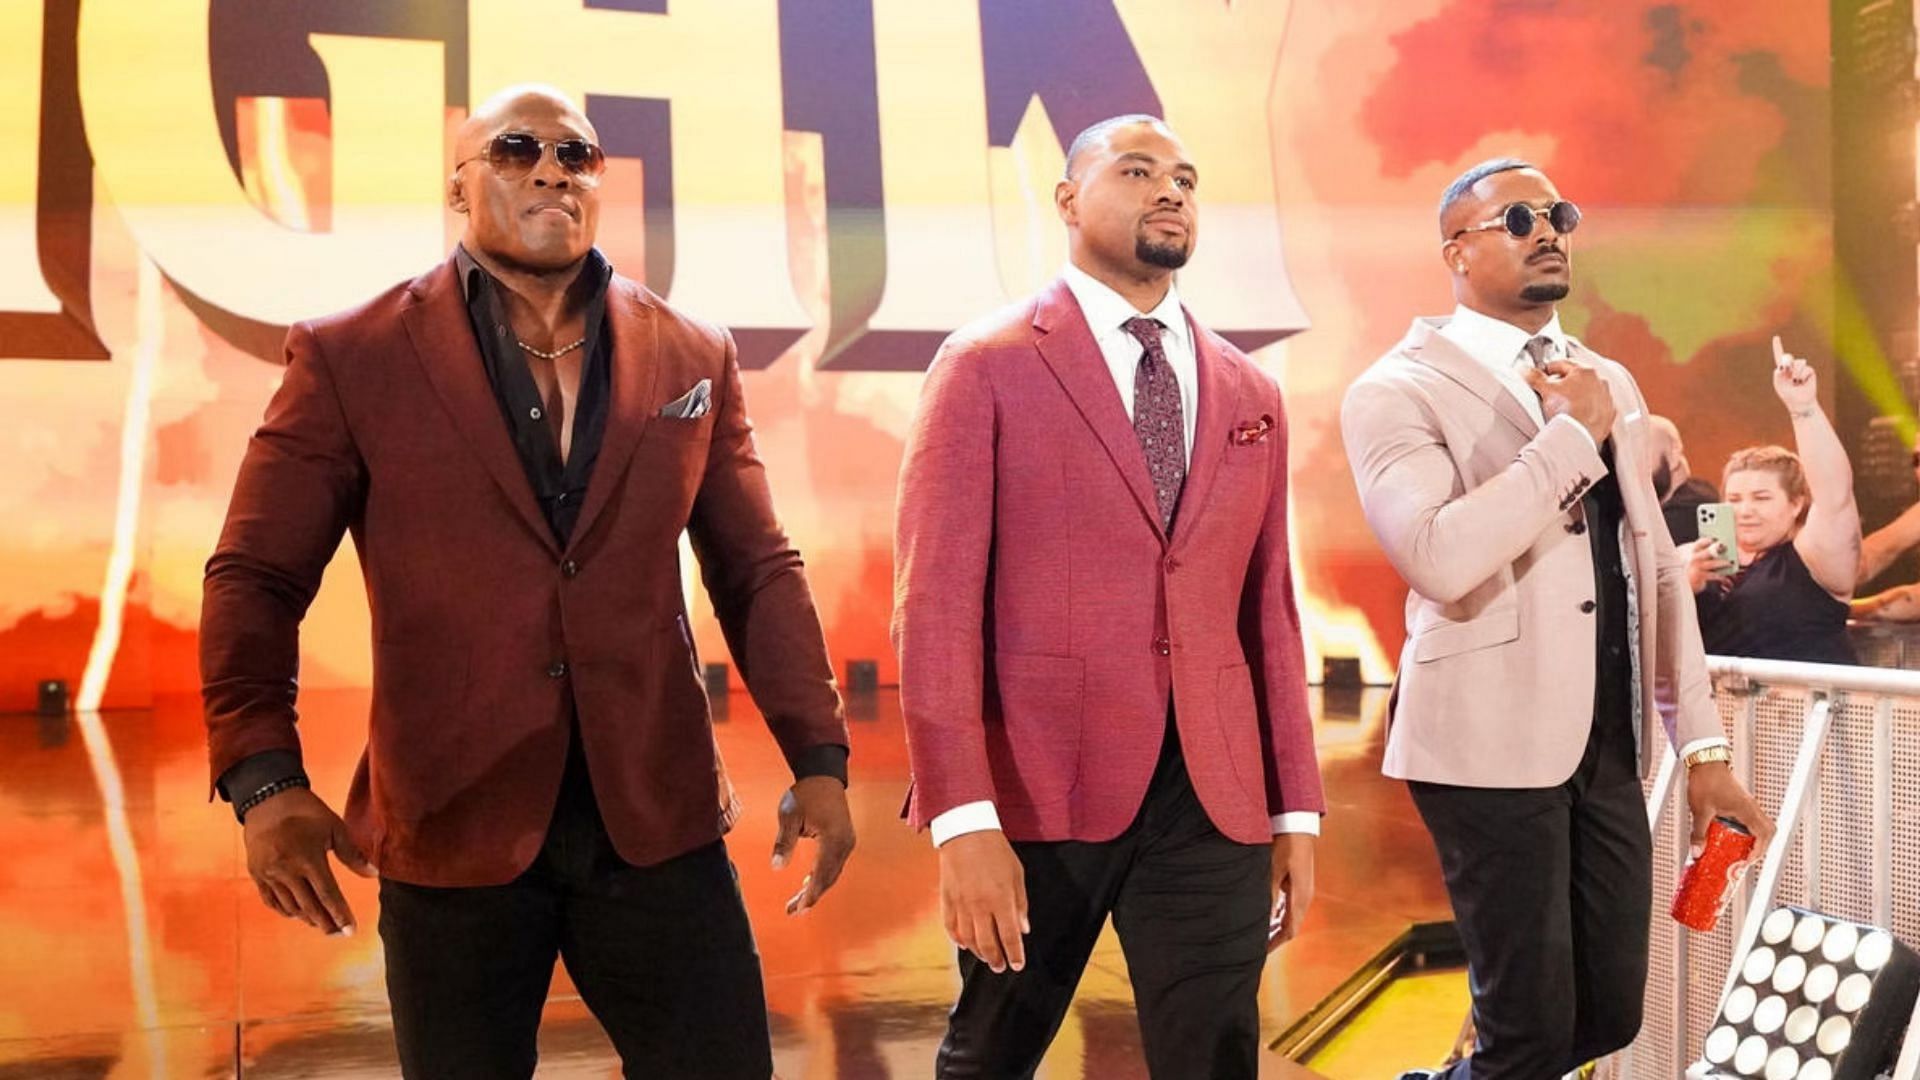 Bobby Lashley and The Street Profits will compete at WWE Fastlane